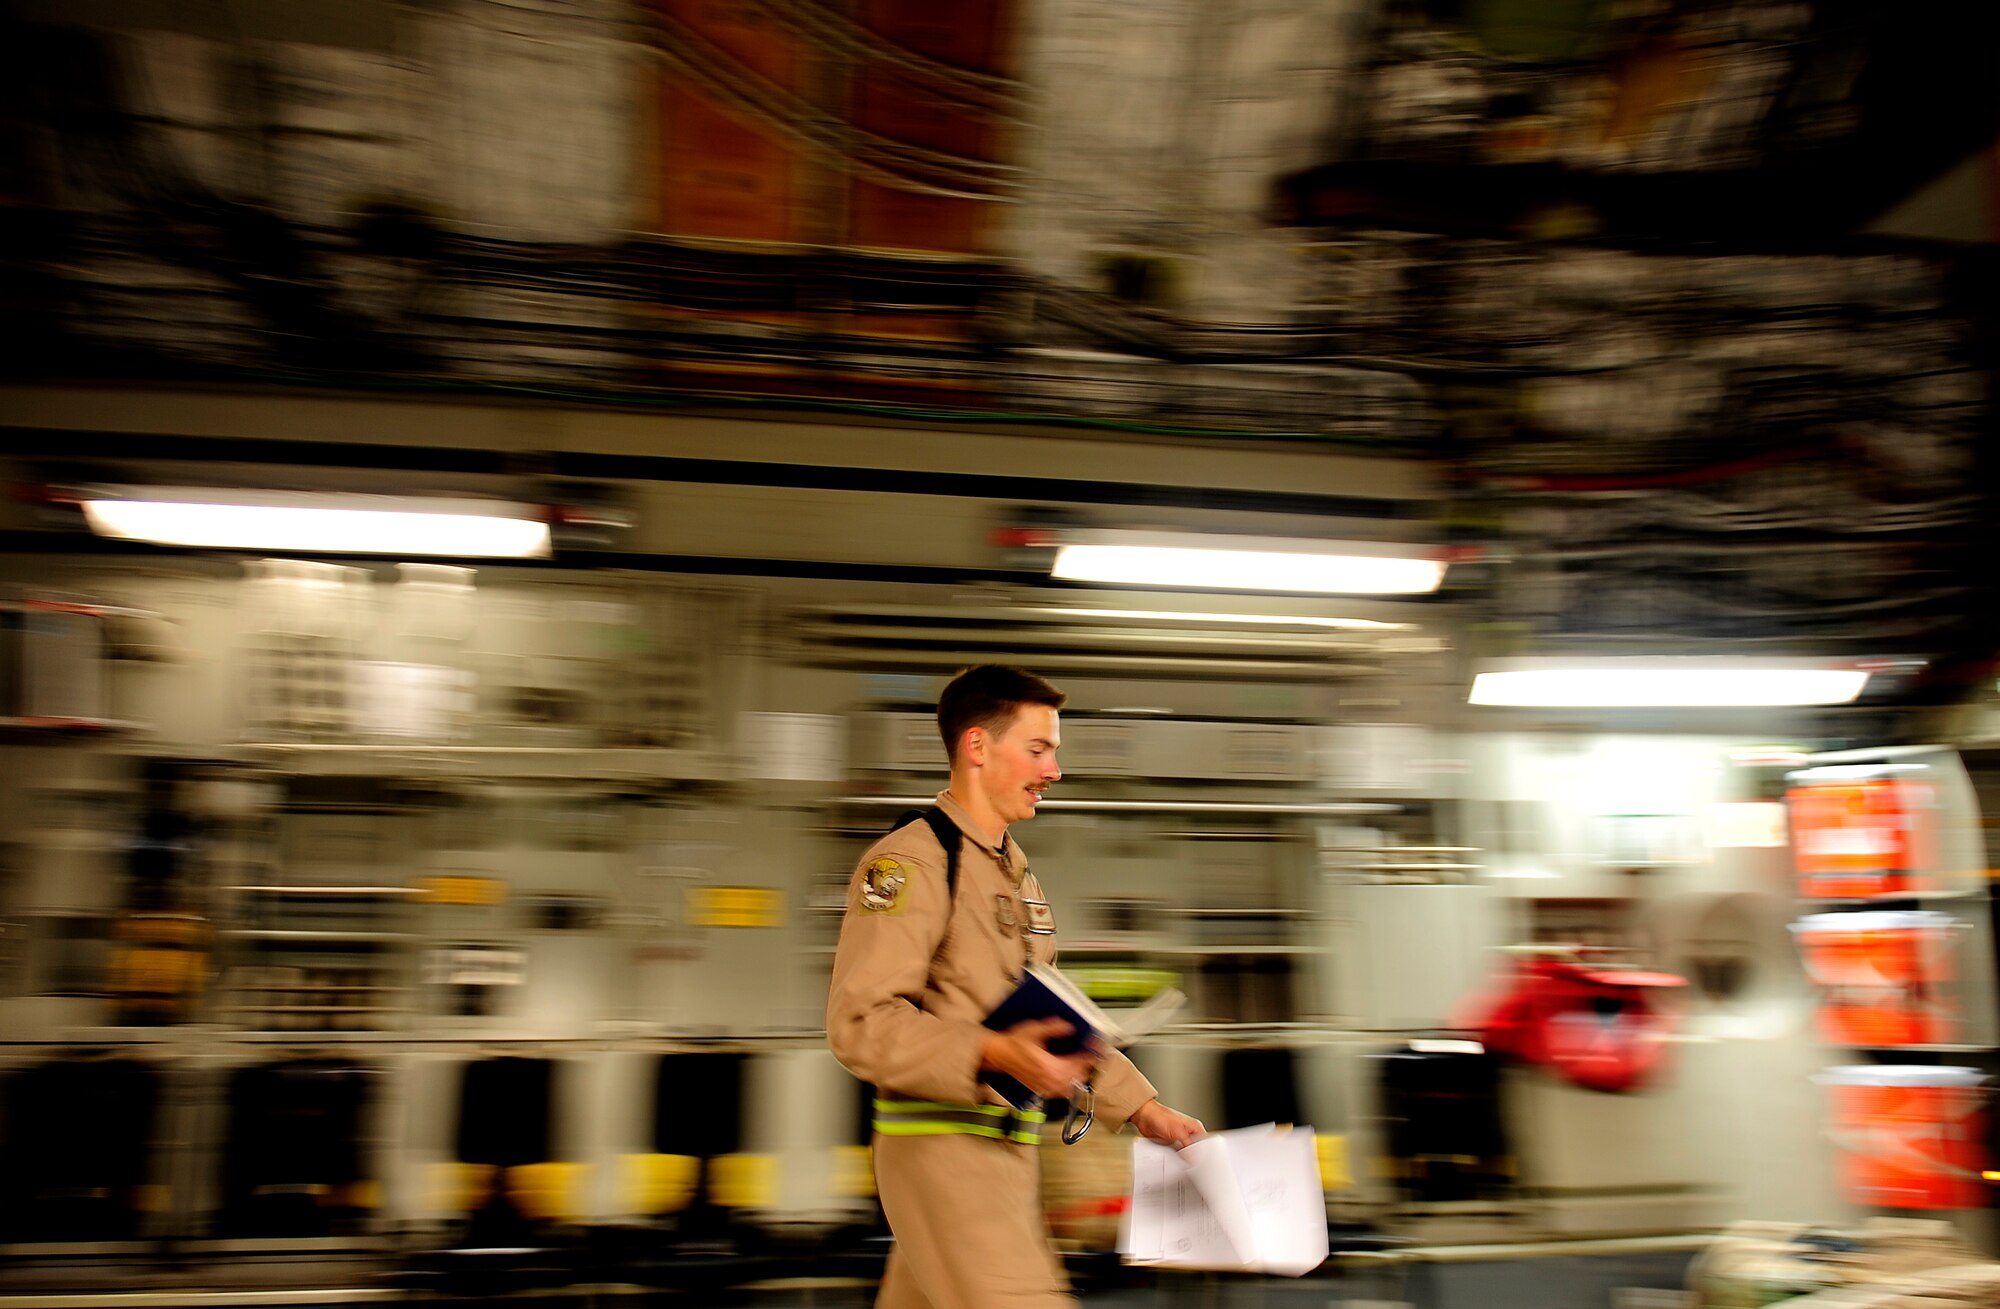 Airman 1st Class David Schmitz, a C-17 Globemaster III aircraft loadmaster assigned to the 816th Expeditionary Airlift Squadron at a non-disclosed base in Southwest Asia, walks back to his station after completing paperwork for a Marine Corps M1A1 Abrams tank being brought to Afghanistan on Nov. 28, 2010. (U.S. Air Force Photo/Staff Sgt. Andy M. Kin)